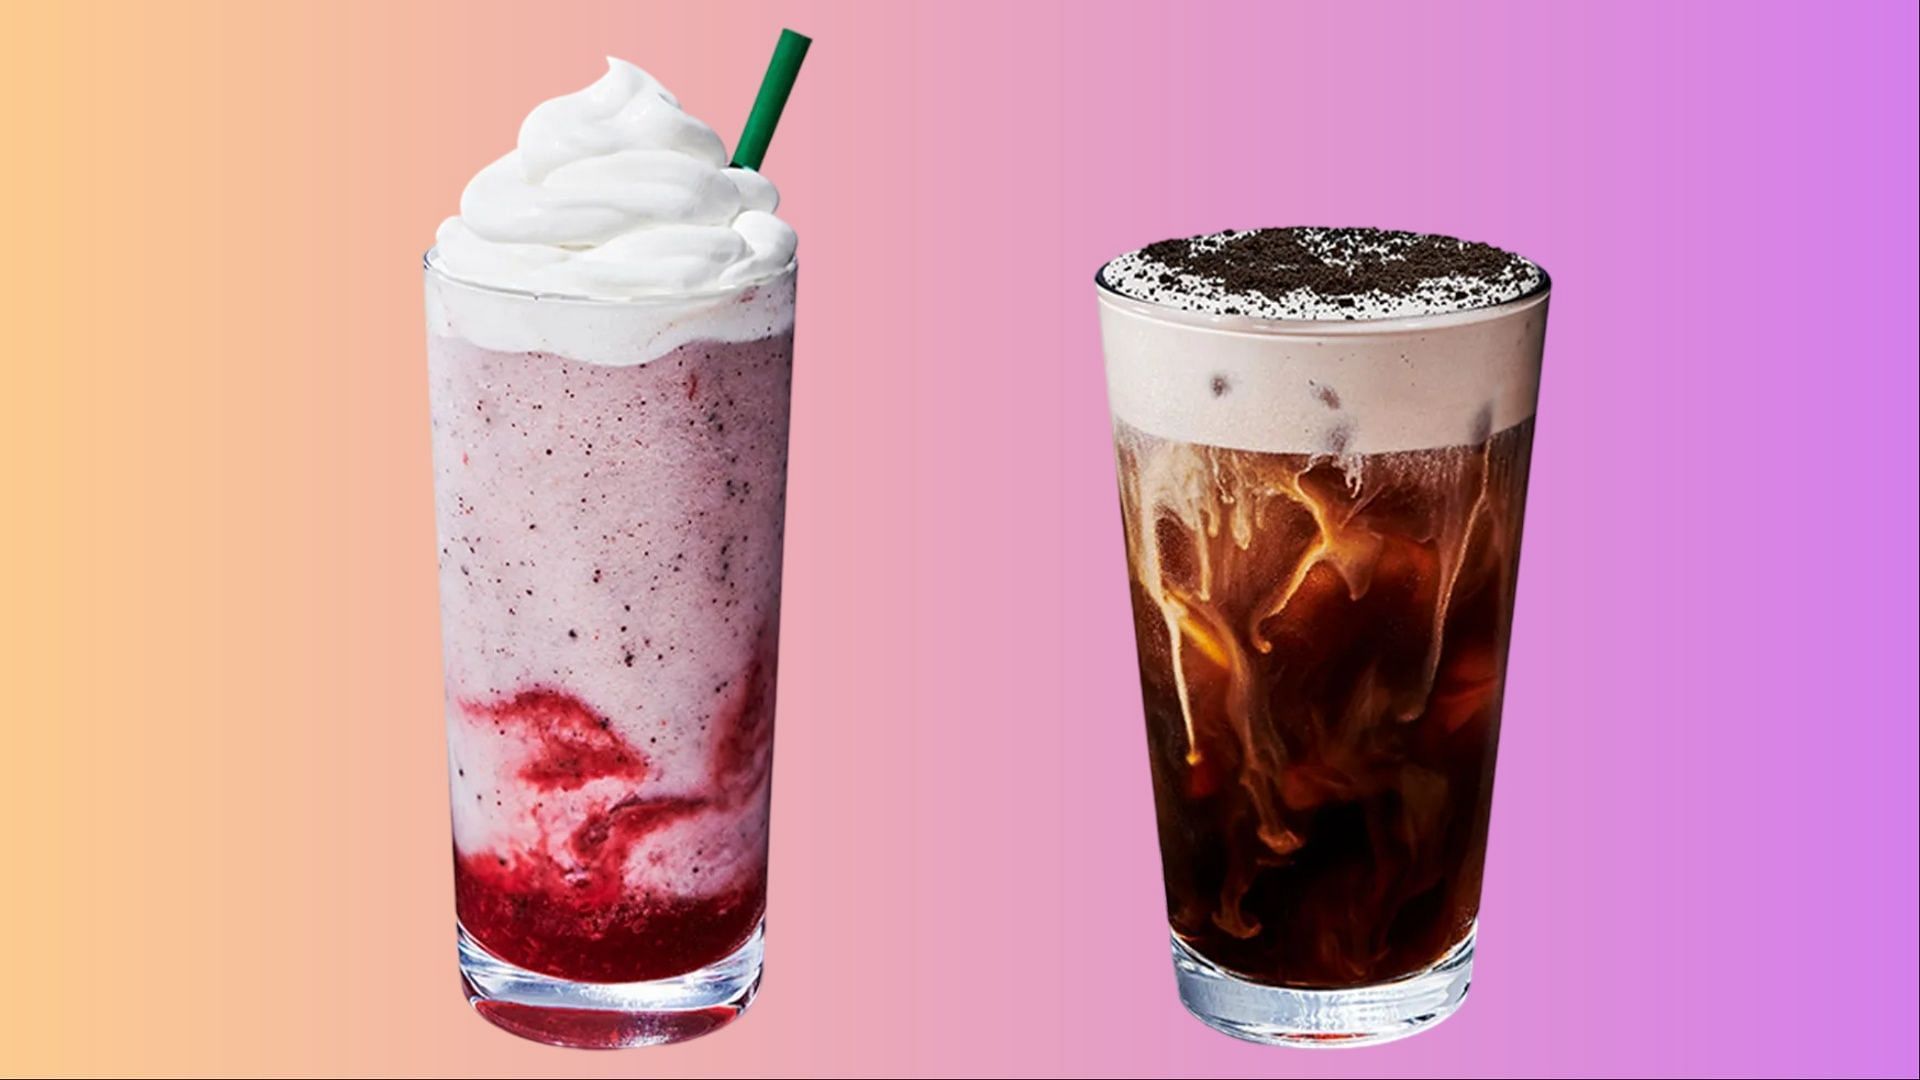 The new Love at First Sip duo is based around chocolatey flavors (Image via Starbucks)